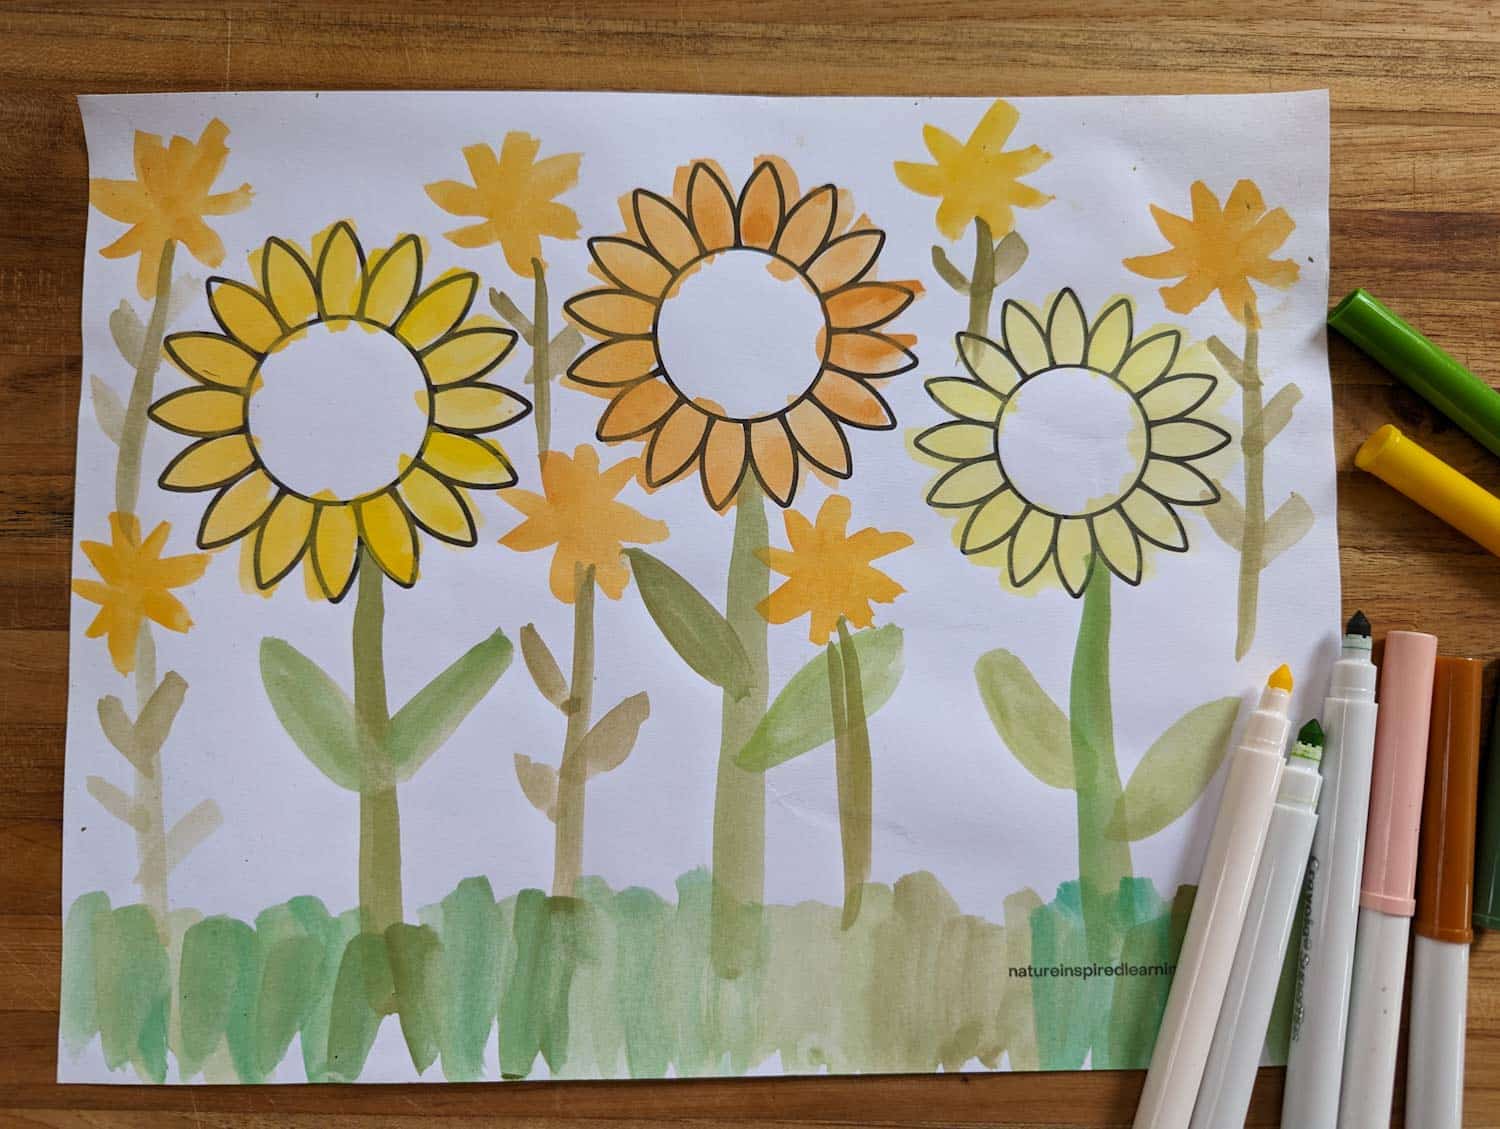 printed off sunflower coloring page on a wooden board with markers on the bottom right with some covers removed